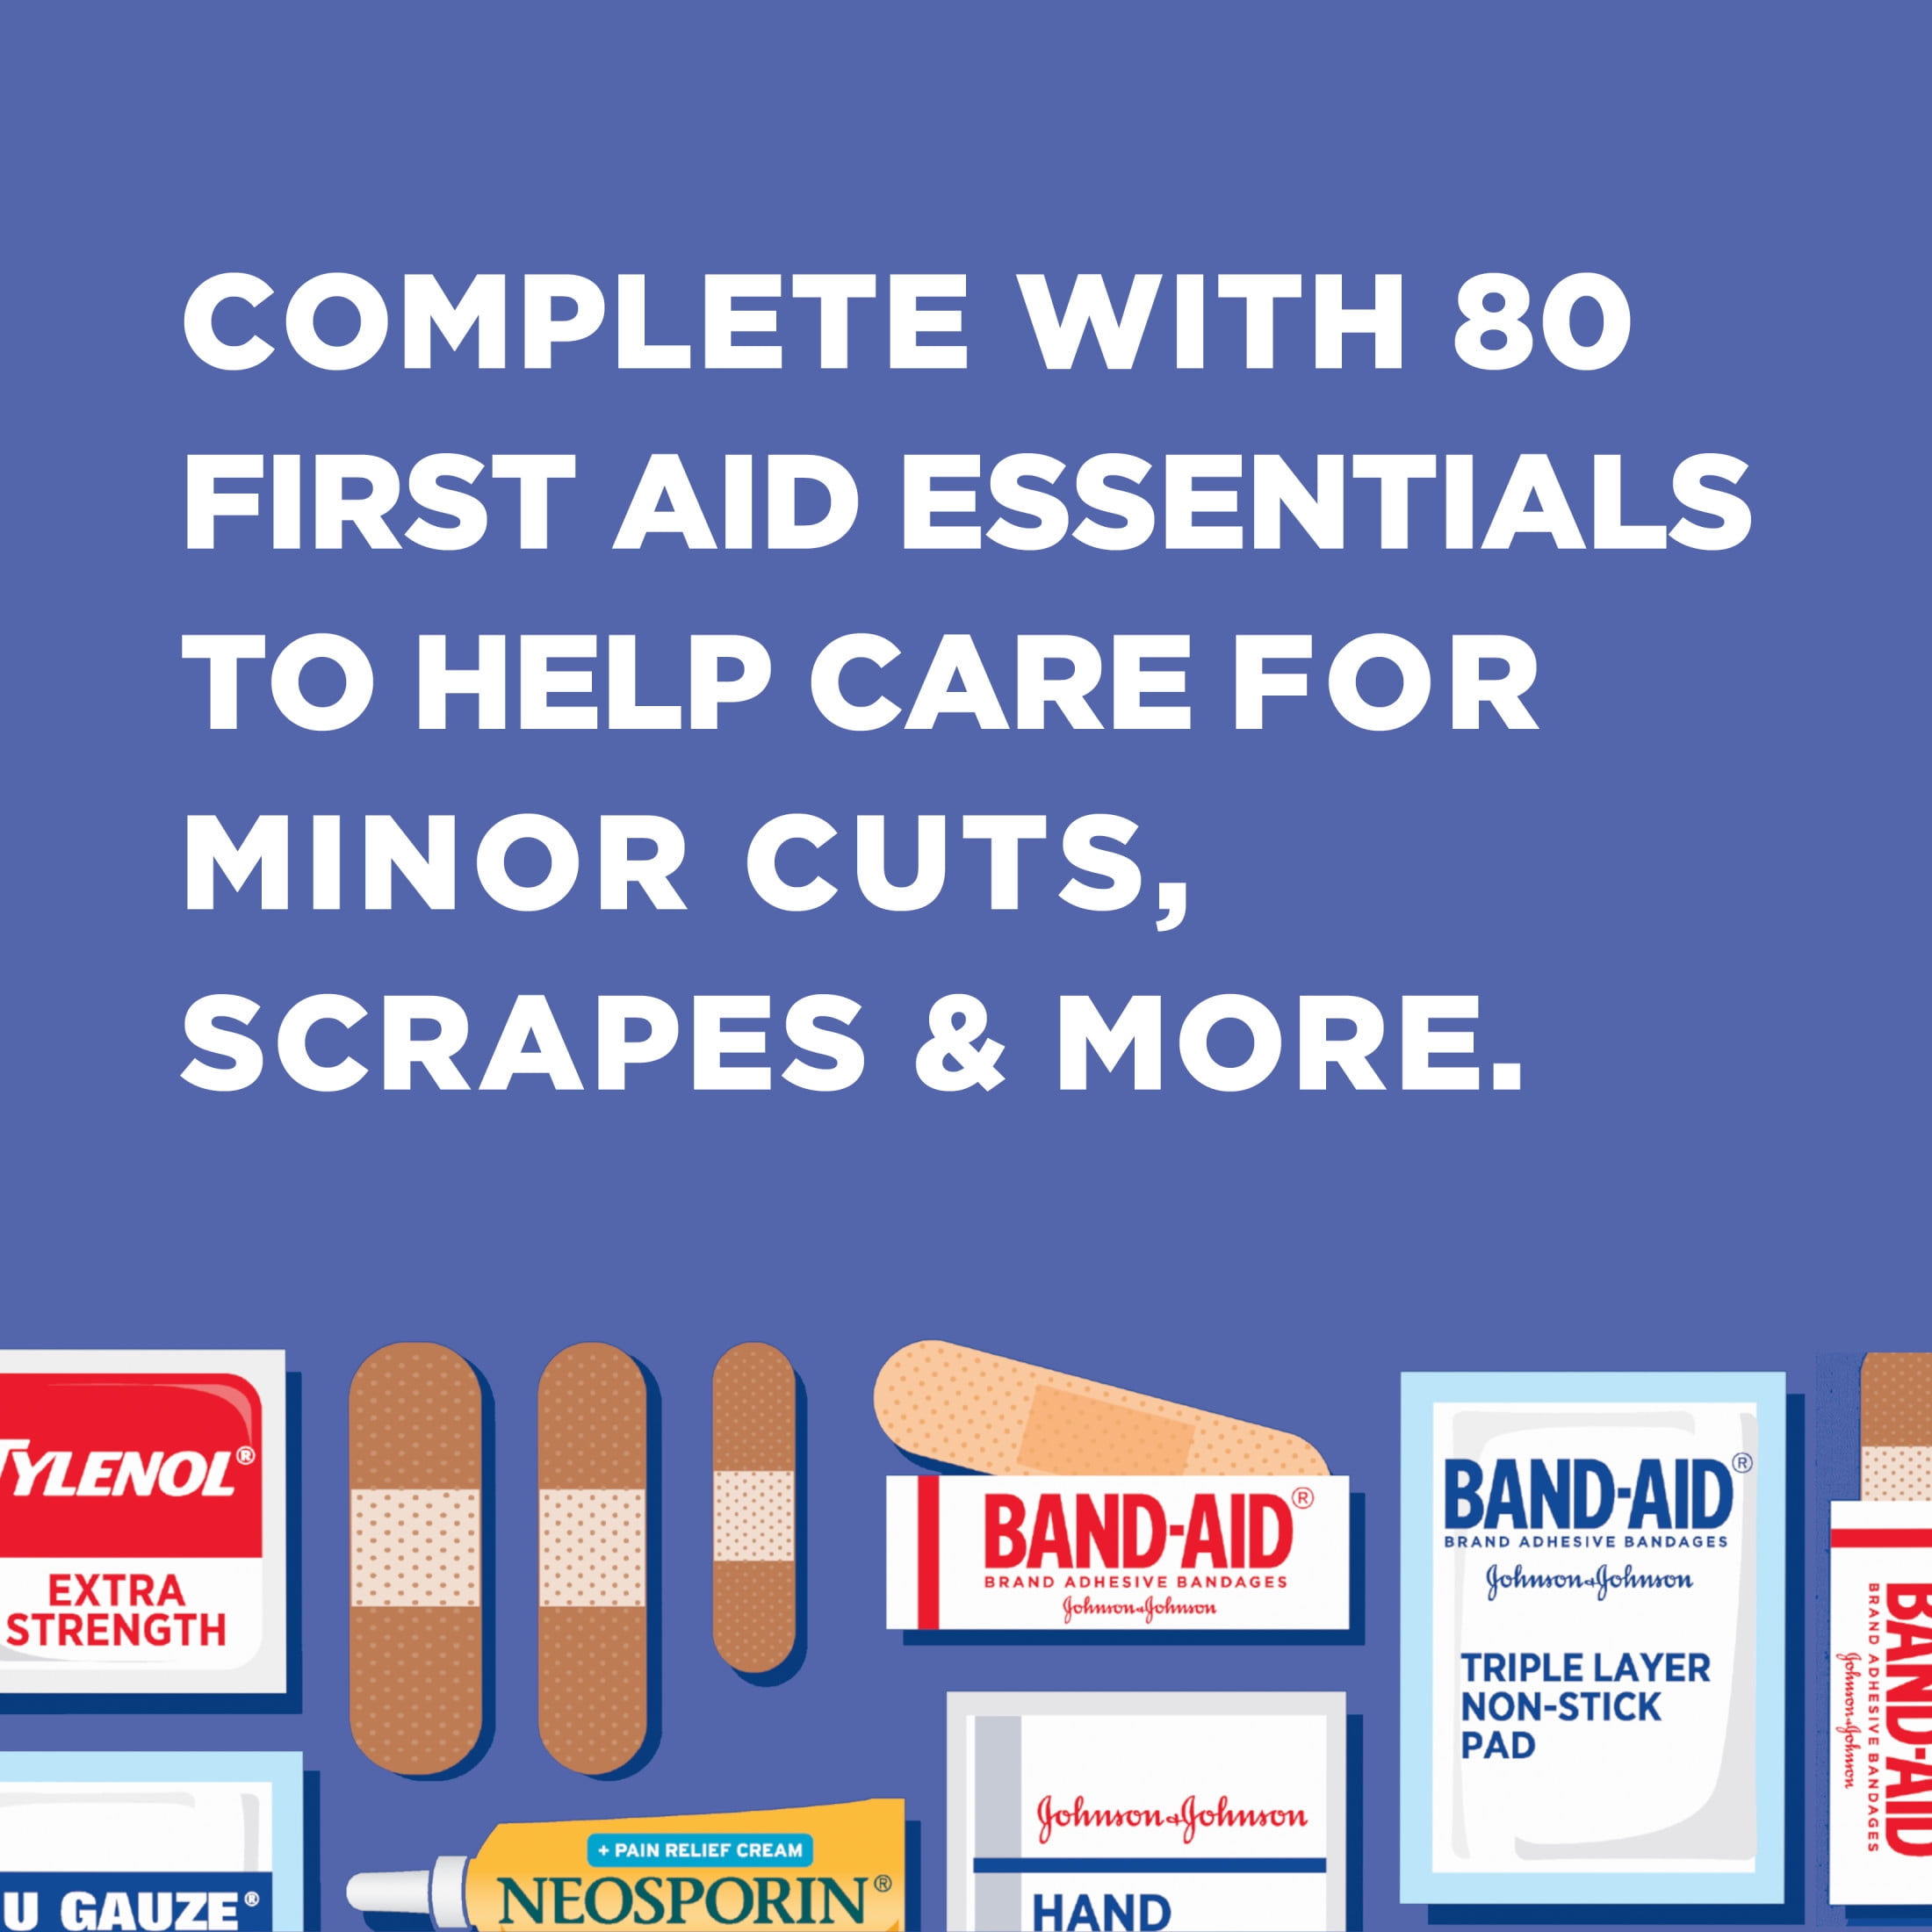 Band-Aid Travel Ready Portable Emergency First Aid Kit for Minor Wound Care  with Assorted Adhesive Bandages, Gauze Pads & More, Ideal for Travel, Car